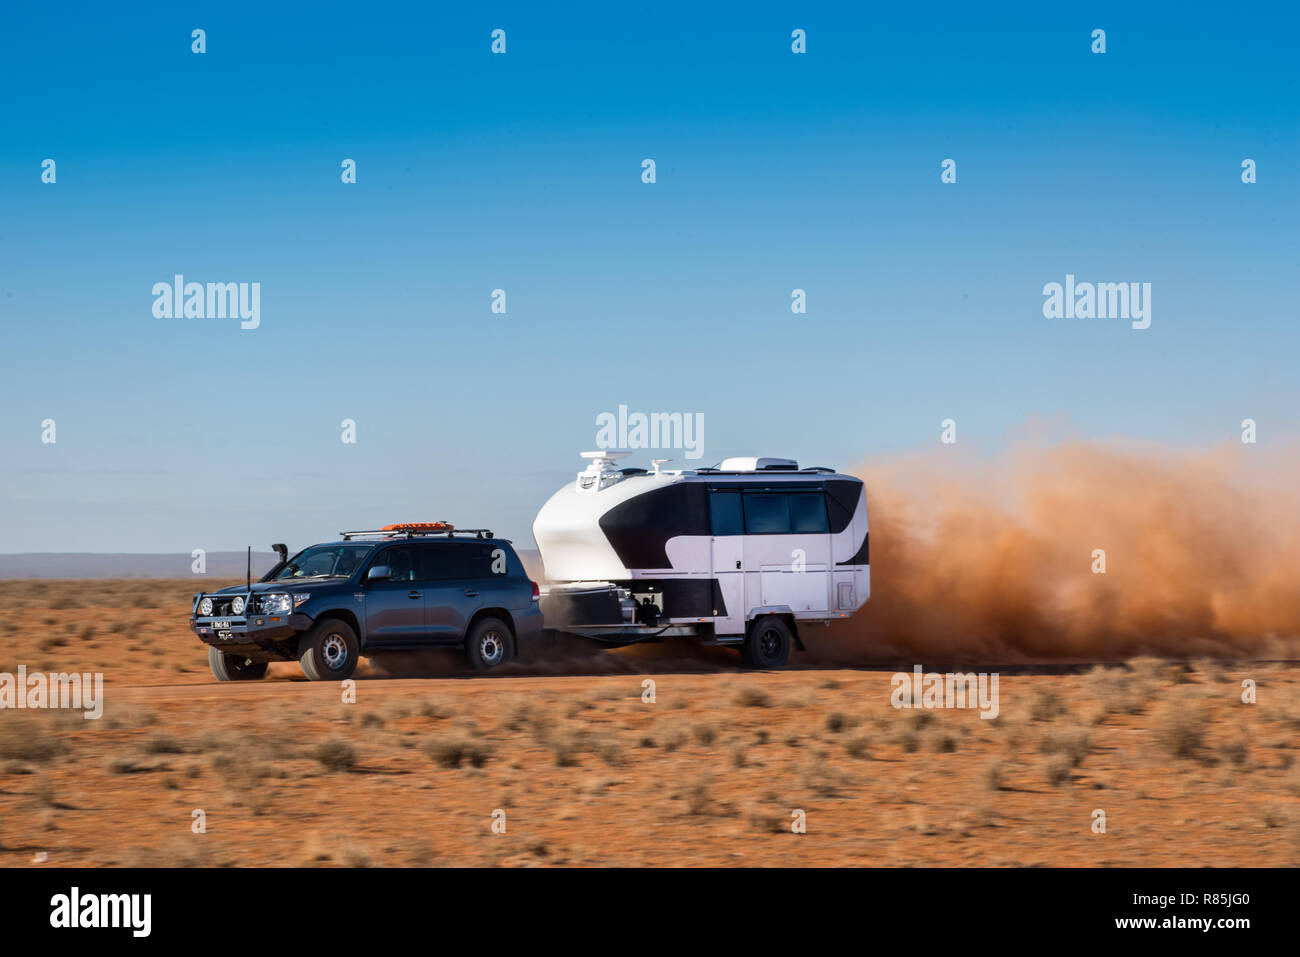 Blue 4wd Toyota LandCruiser towing large, off-road caravan through bull dust on outback Australia red dirt road. Stock Photo